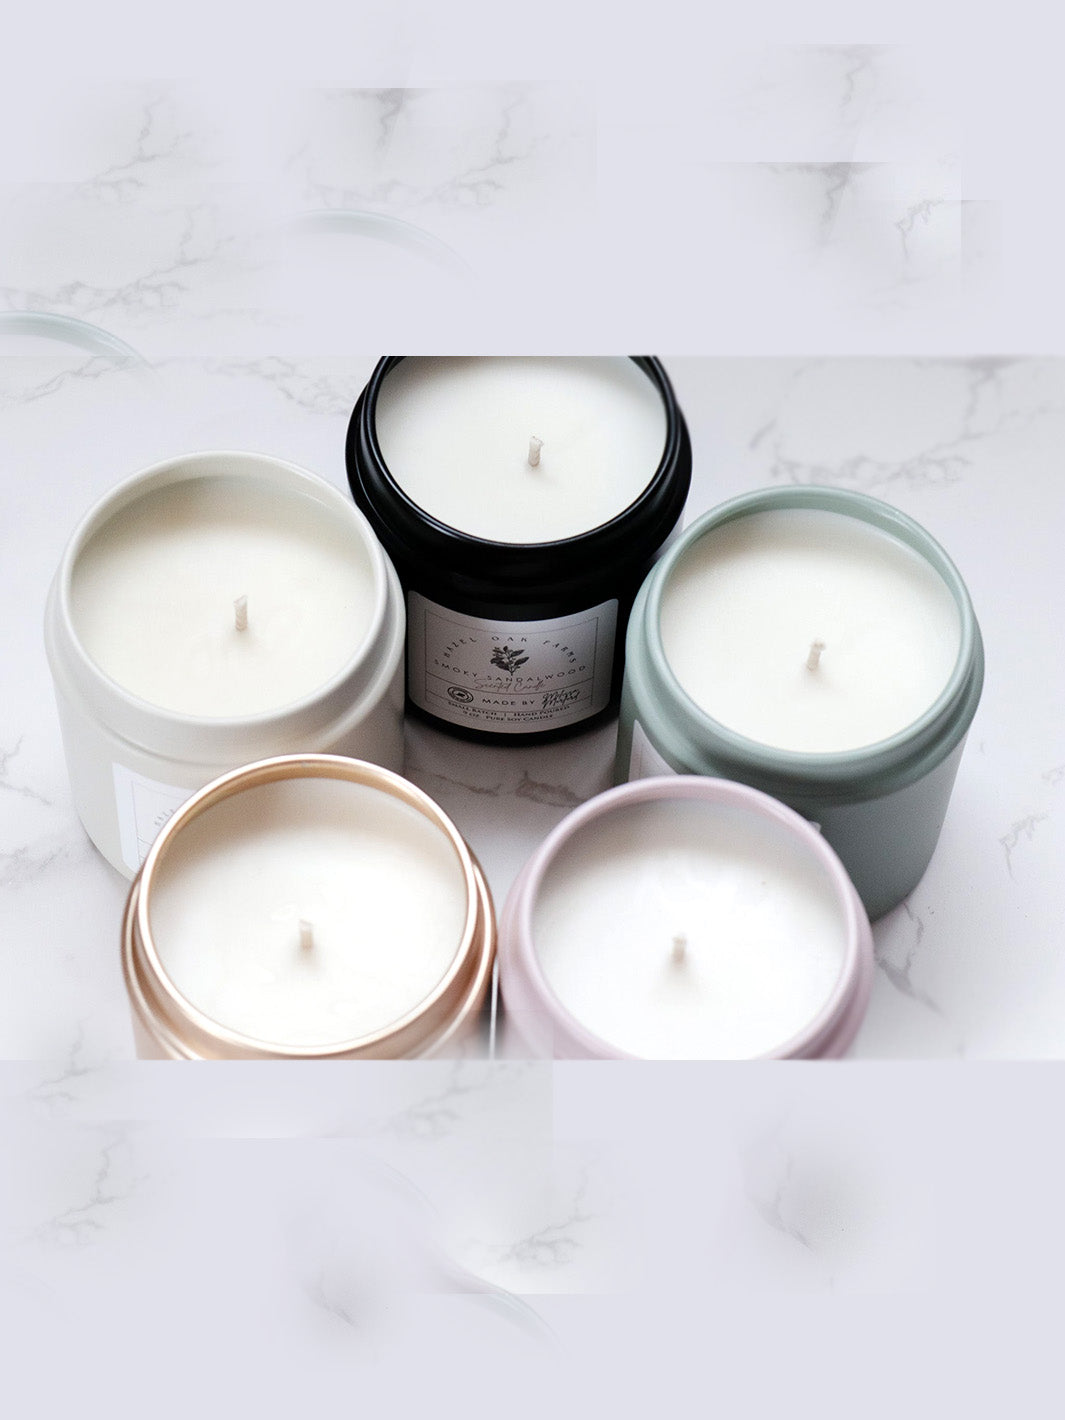 Lavender Fields - Melissa's Pure Soy Candles (in stock) Earthly Comfort Home Decor 2195-3